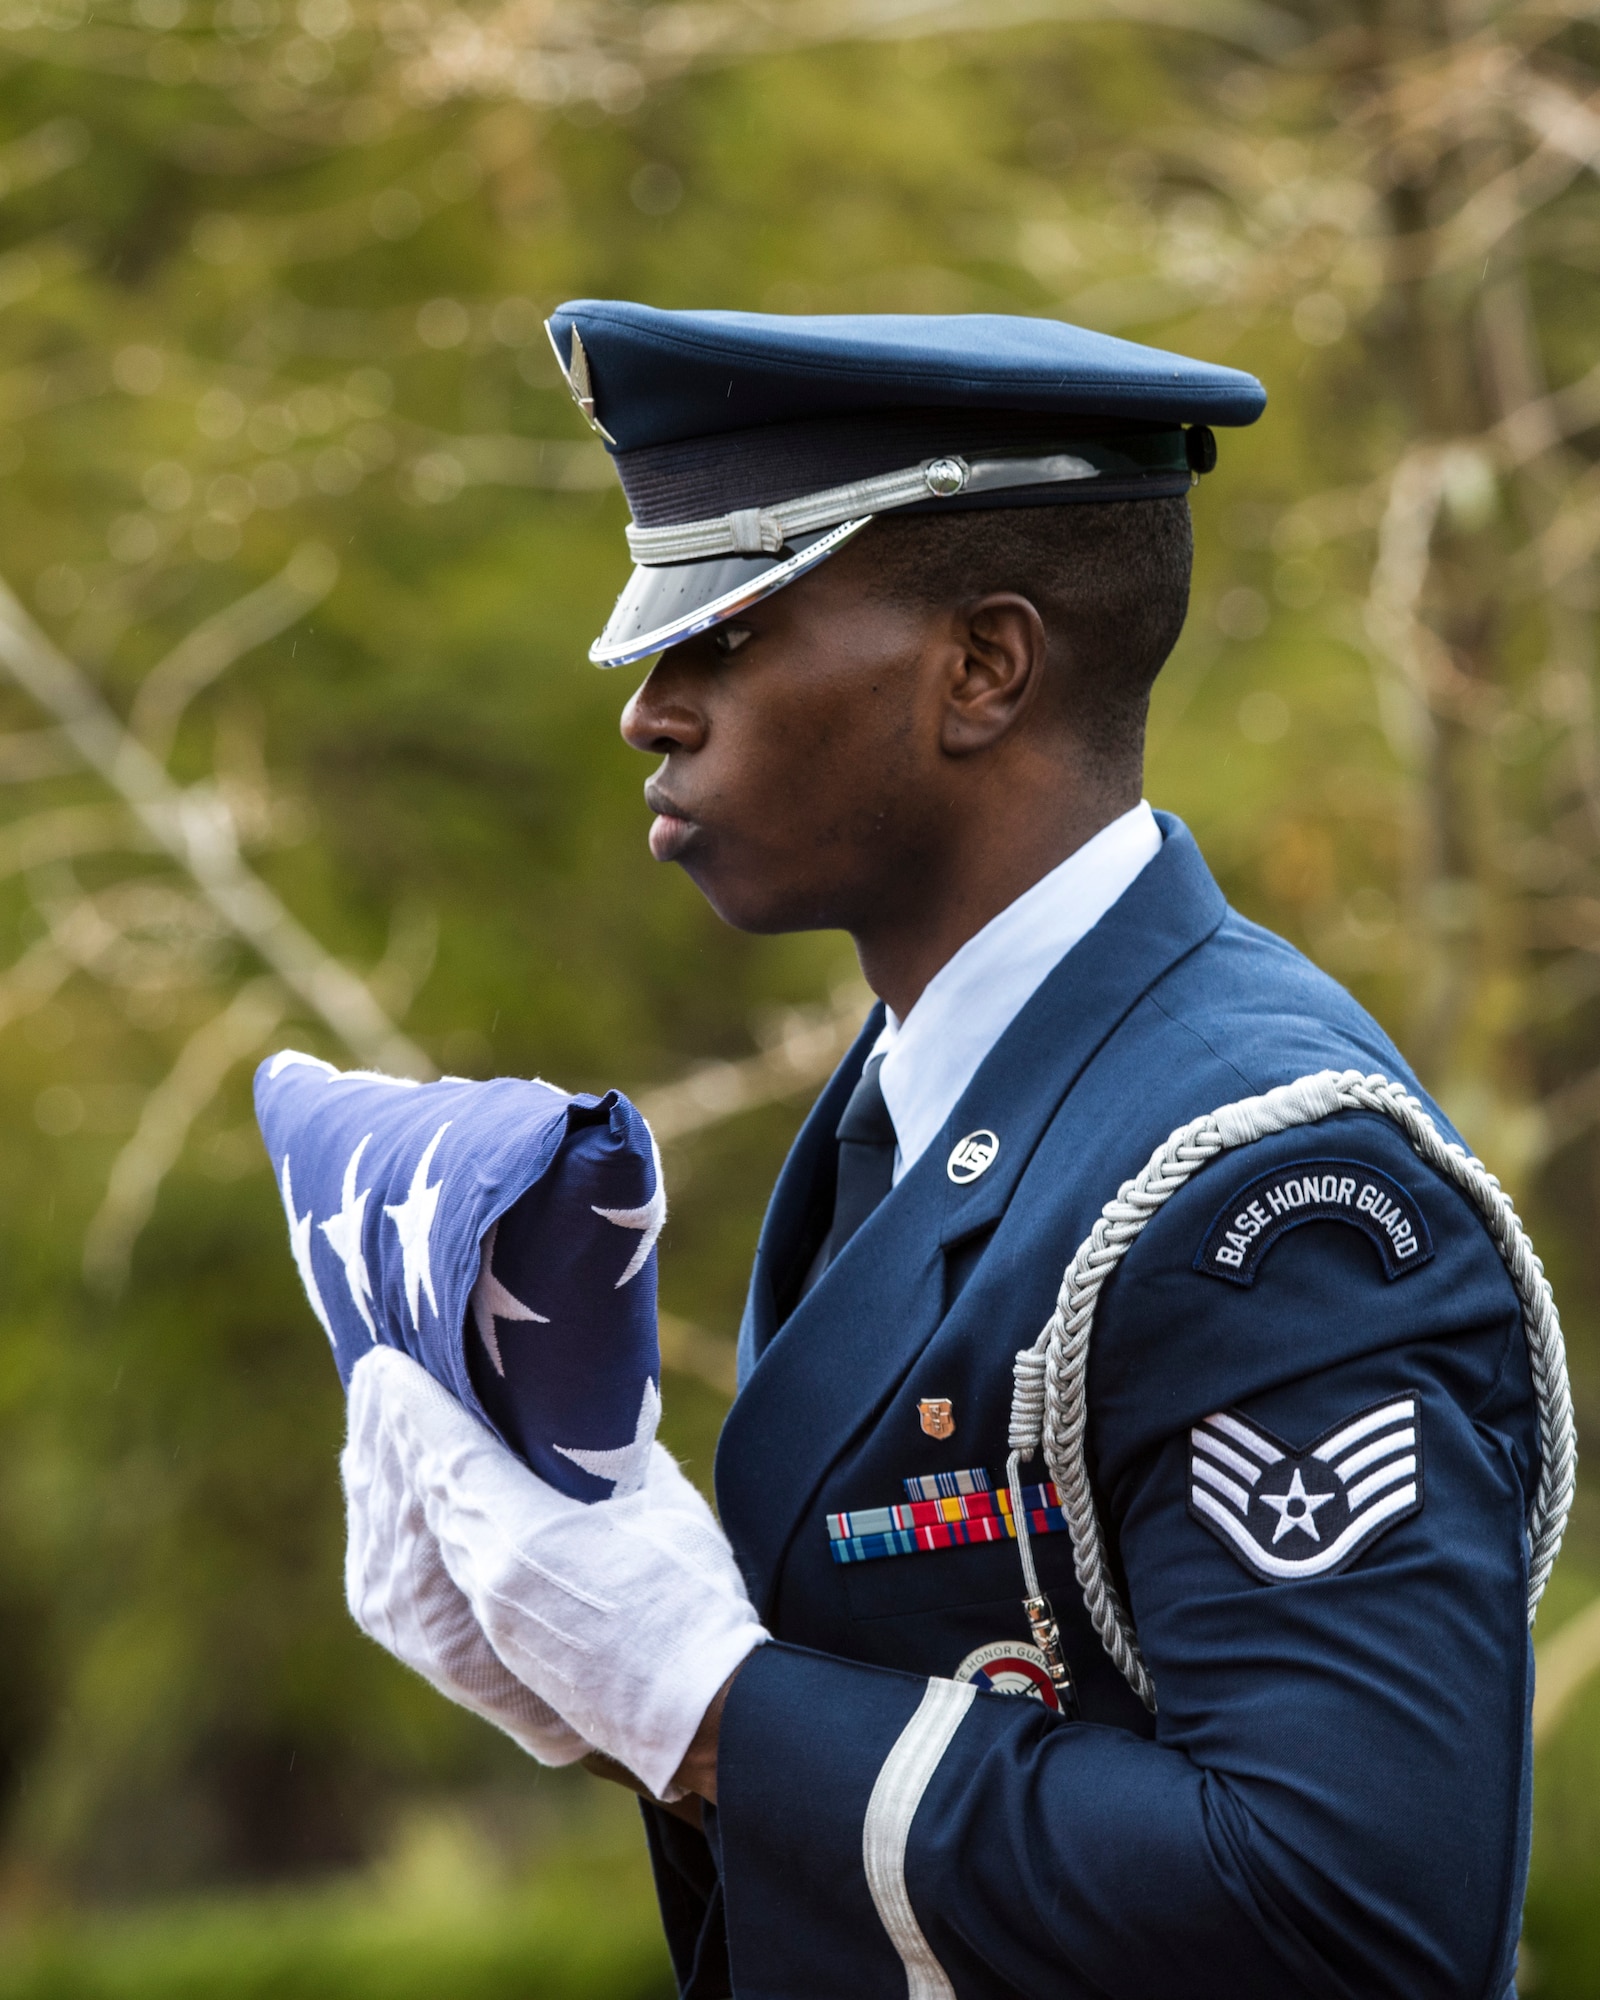 Staff Sgt. Marcus Hardy, Vandenberg Honor Guard flight chief and lead trainer, prepares to pass the flag to the next-of-kin during a U.S. Air Force active duty funeral March 2, 2019, in Camarillo, Calif. During a military funeral, guardsmen have the opportunity to either present the colors, be a member of the firing team or carry the casket with a flag draping over the fallen veteran. (U.S. Air Force photo by Airman 1st Class Aubree Milks)